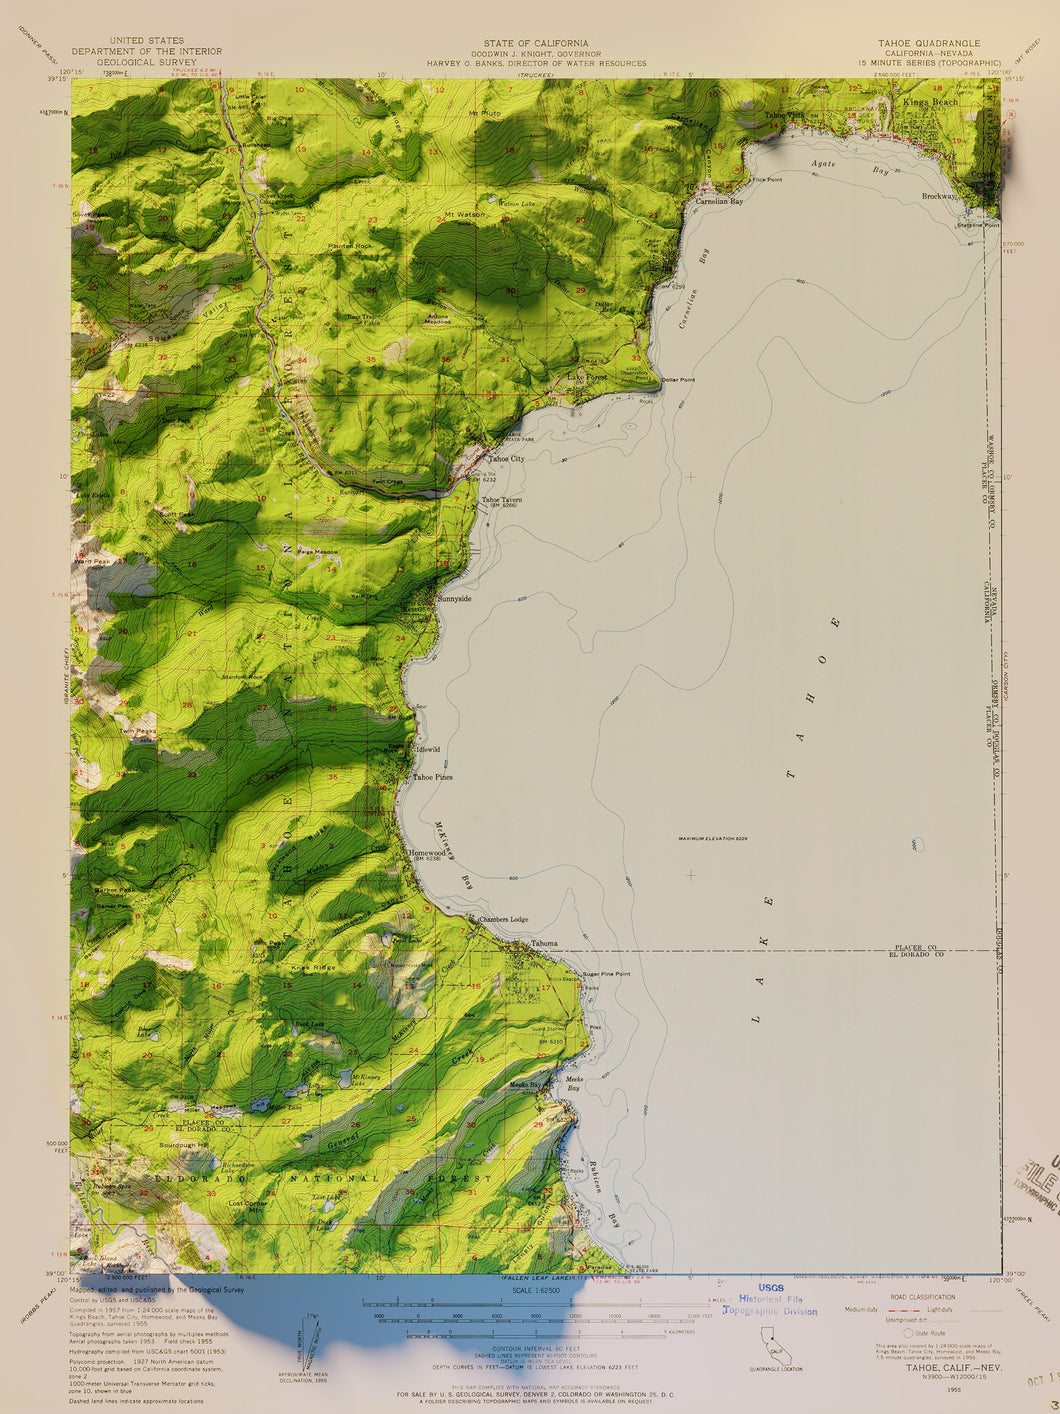 Lake Tahoe California Map Poster - Shaded Relief Topographical Map Poster